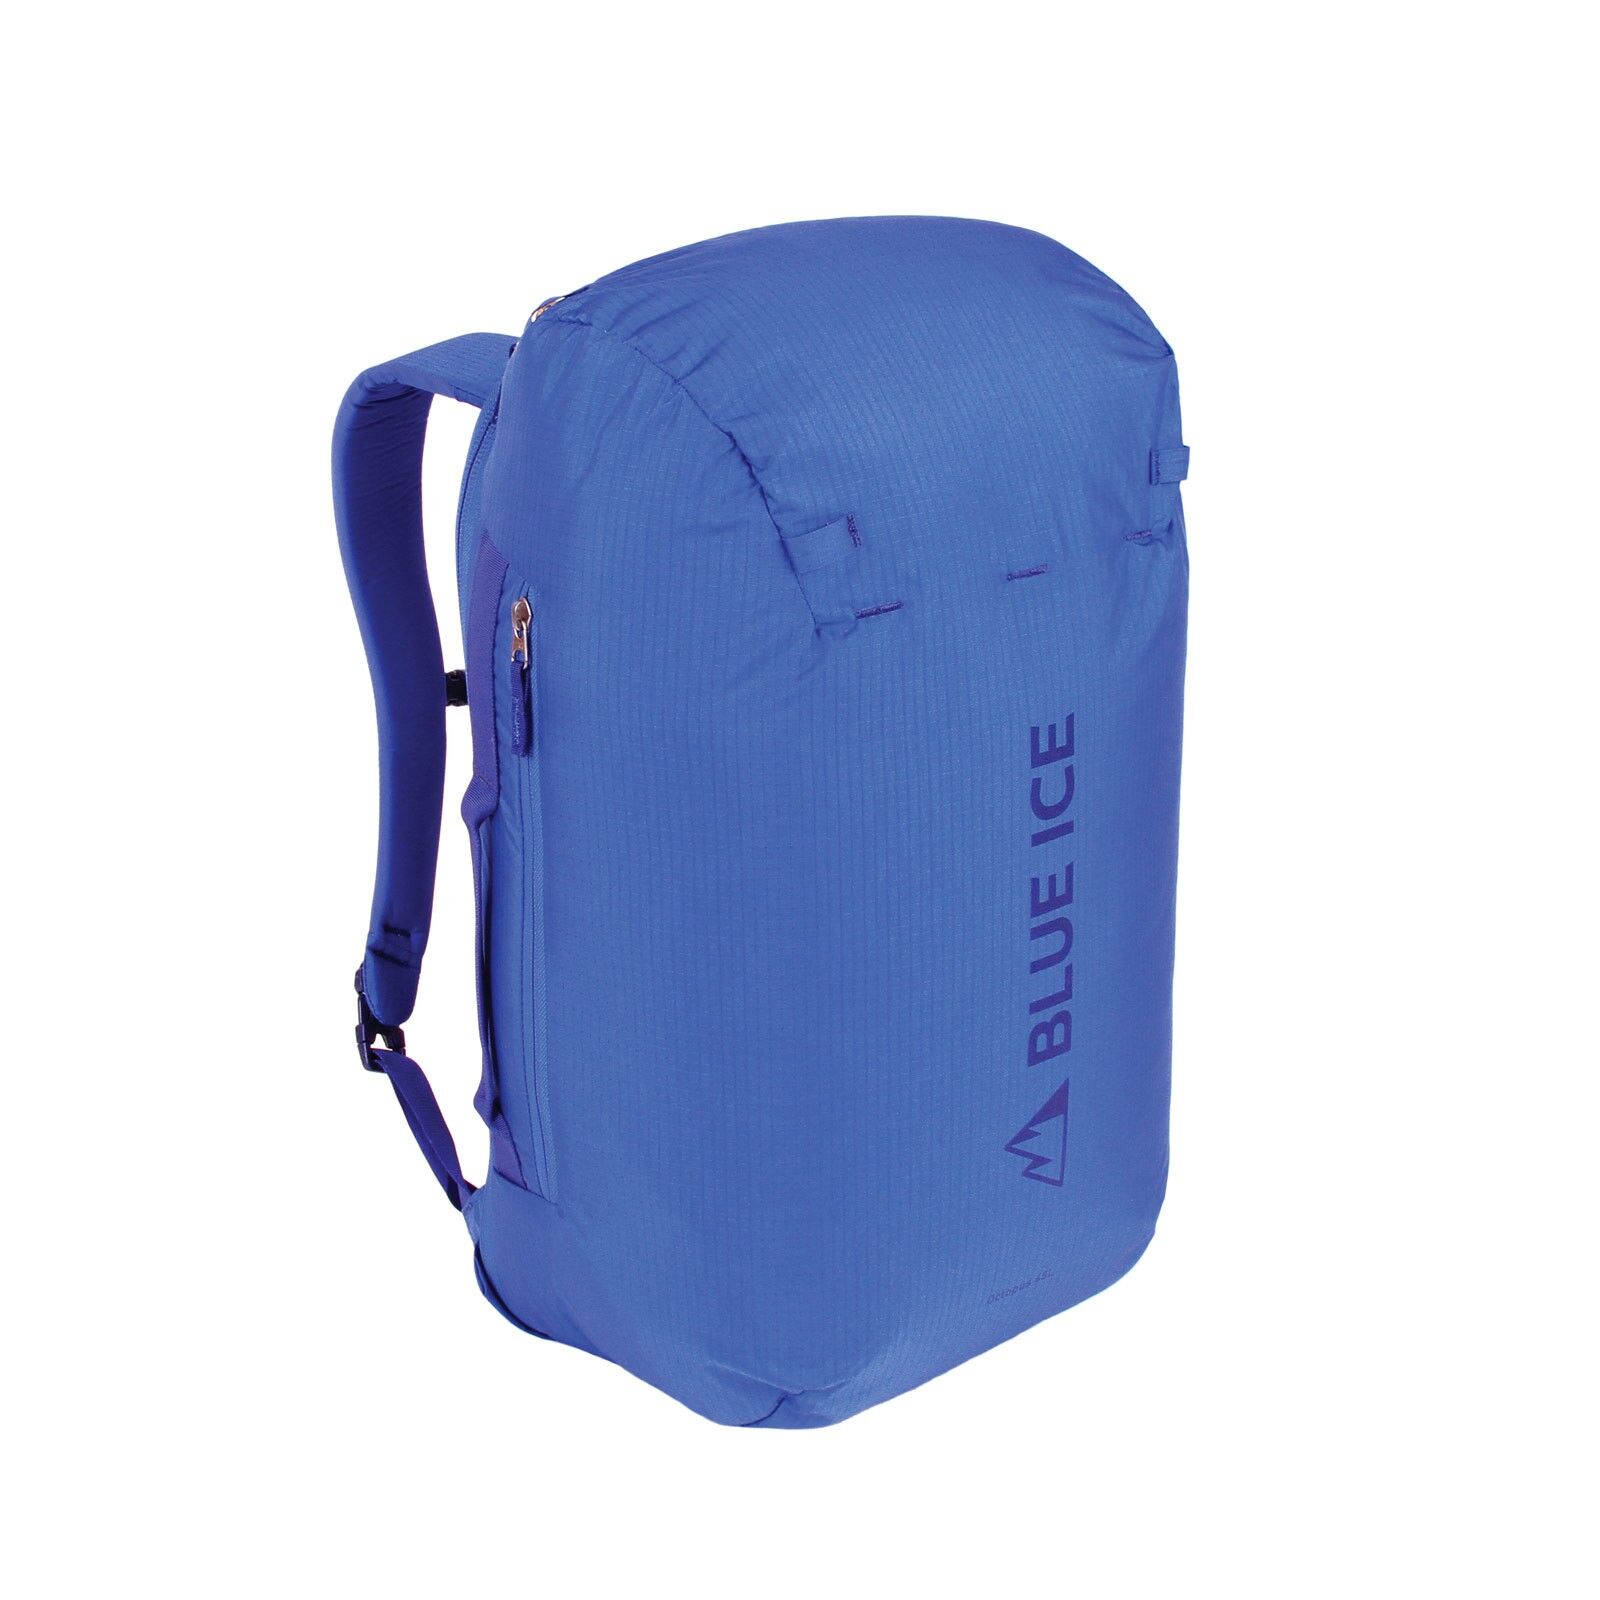 Blue Ice Octopus 45 - Climbing backpack